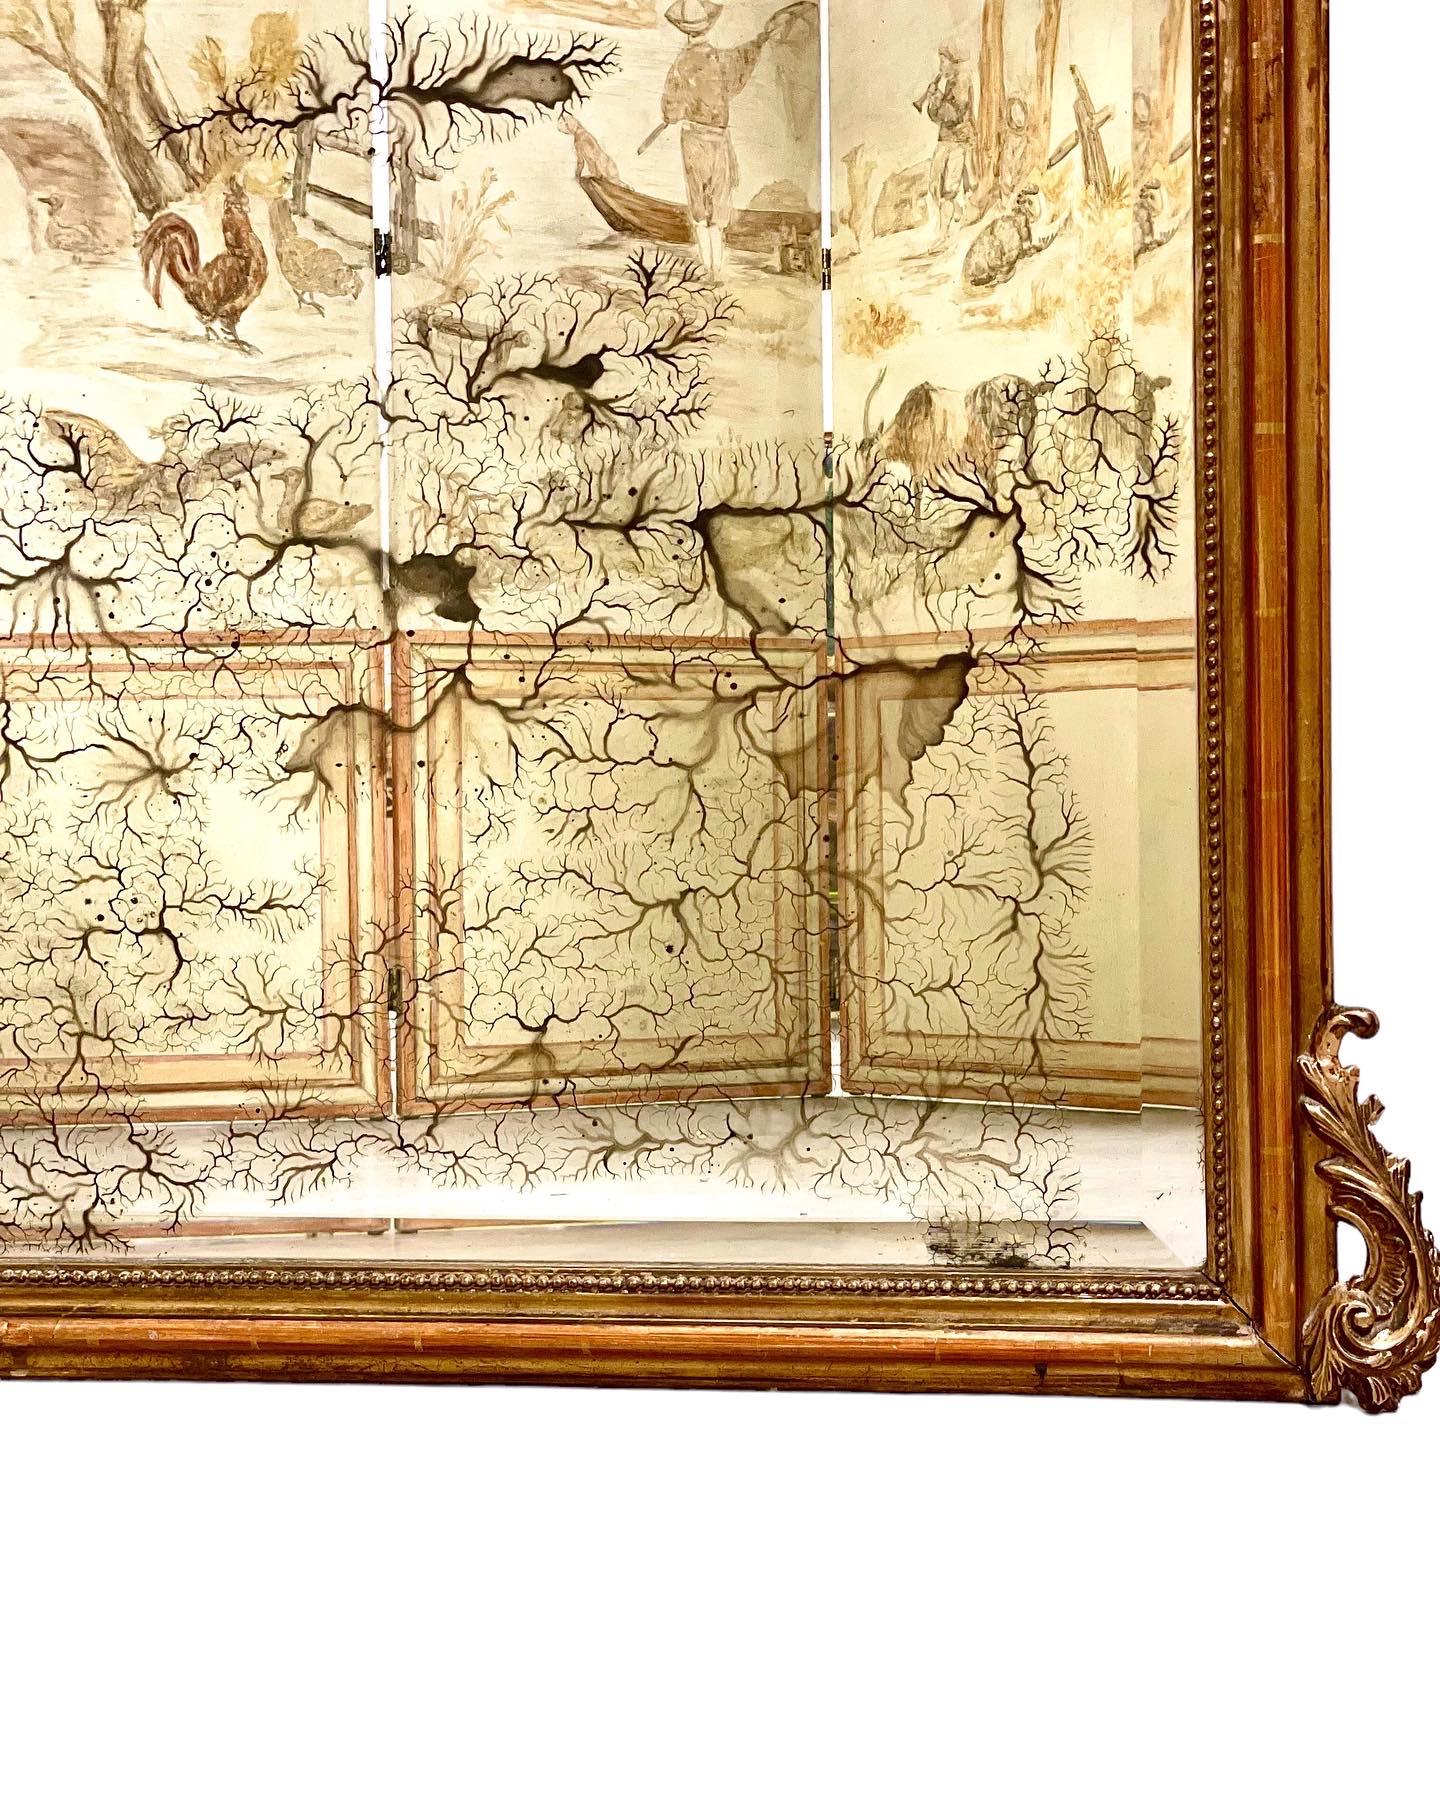 An imposing 19th century Napoleon III period Louis XV-style gilt overmantel mirror. Topped with an exuberant crest of stylised foliage and shells, and swirling Rocaille motifs, this beautiful piece has some considerable foxing to its original